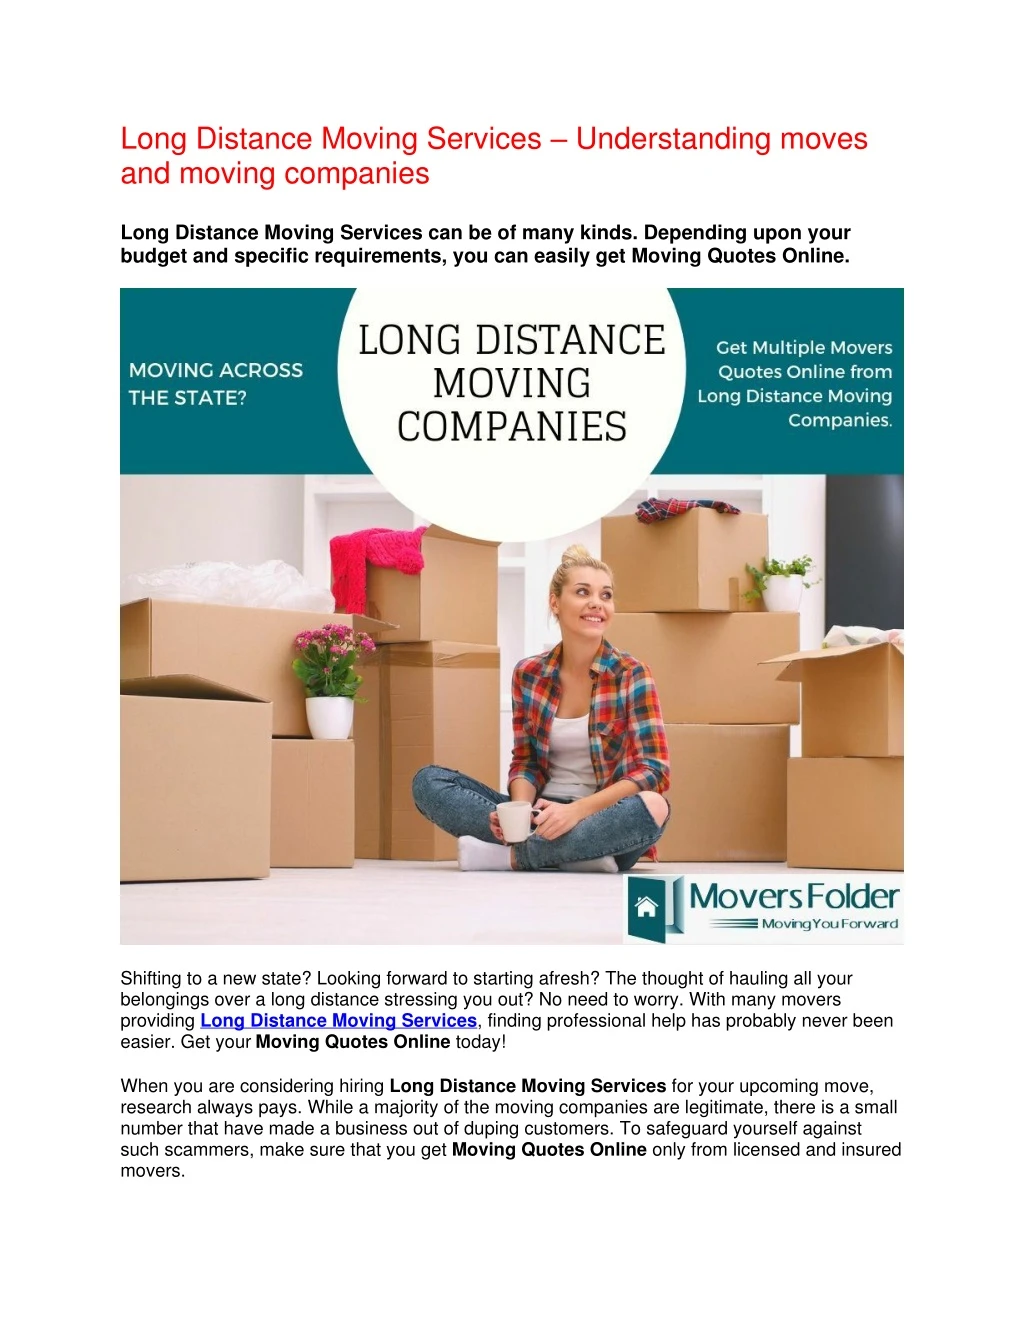 long distance moving services understanding moves